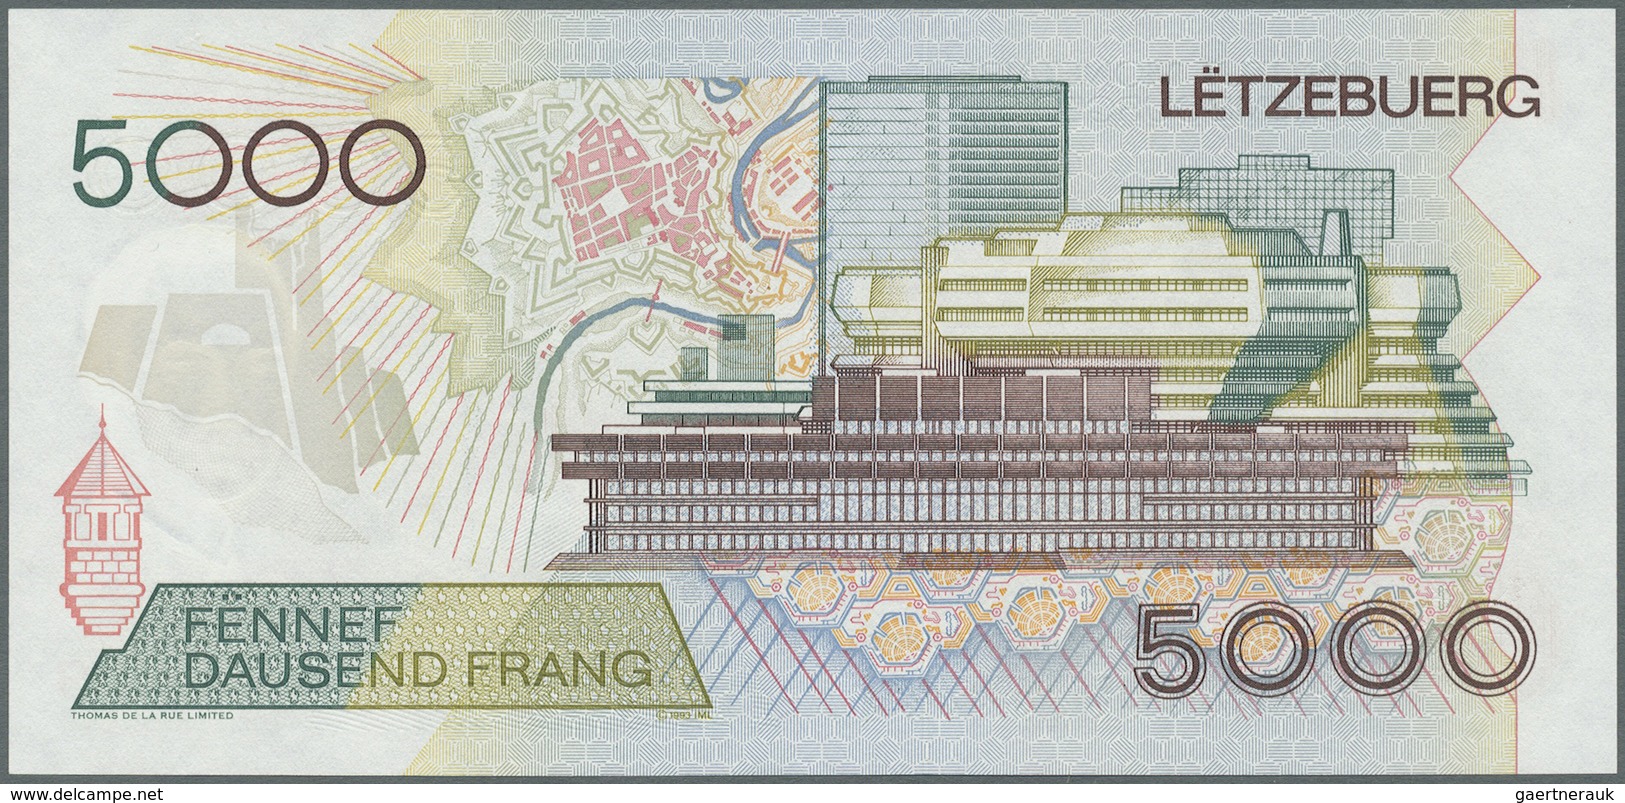 Luxembourg: 5000 Francs 1996 P. 60b In Great Original Condition: UNC. - Luxembourg